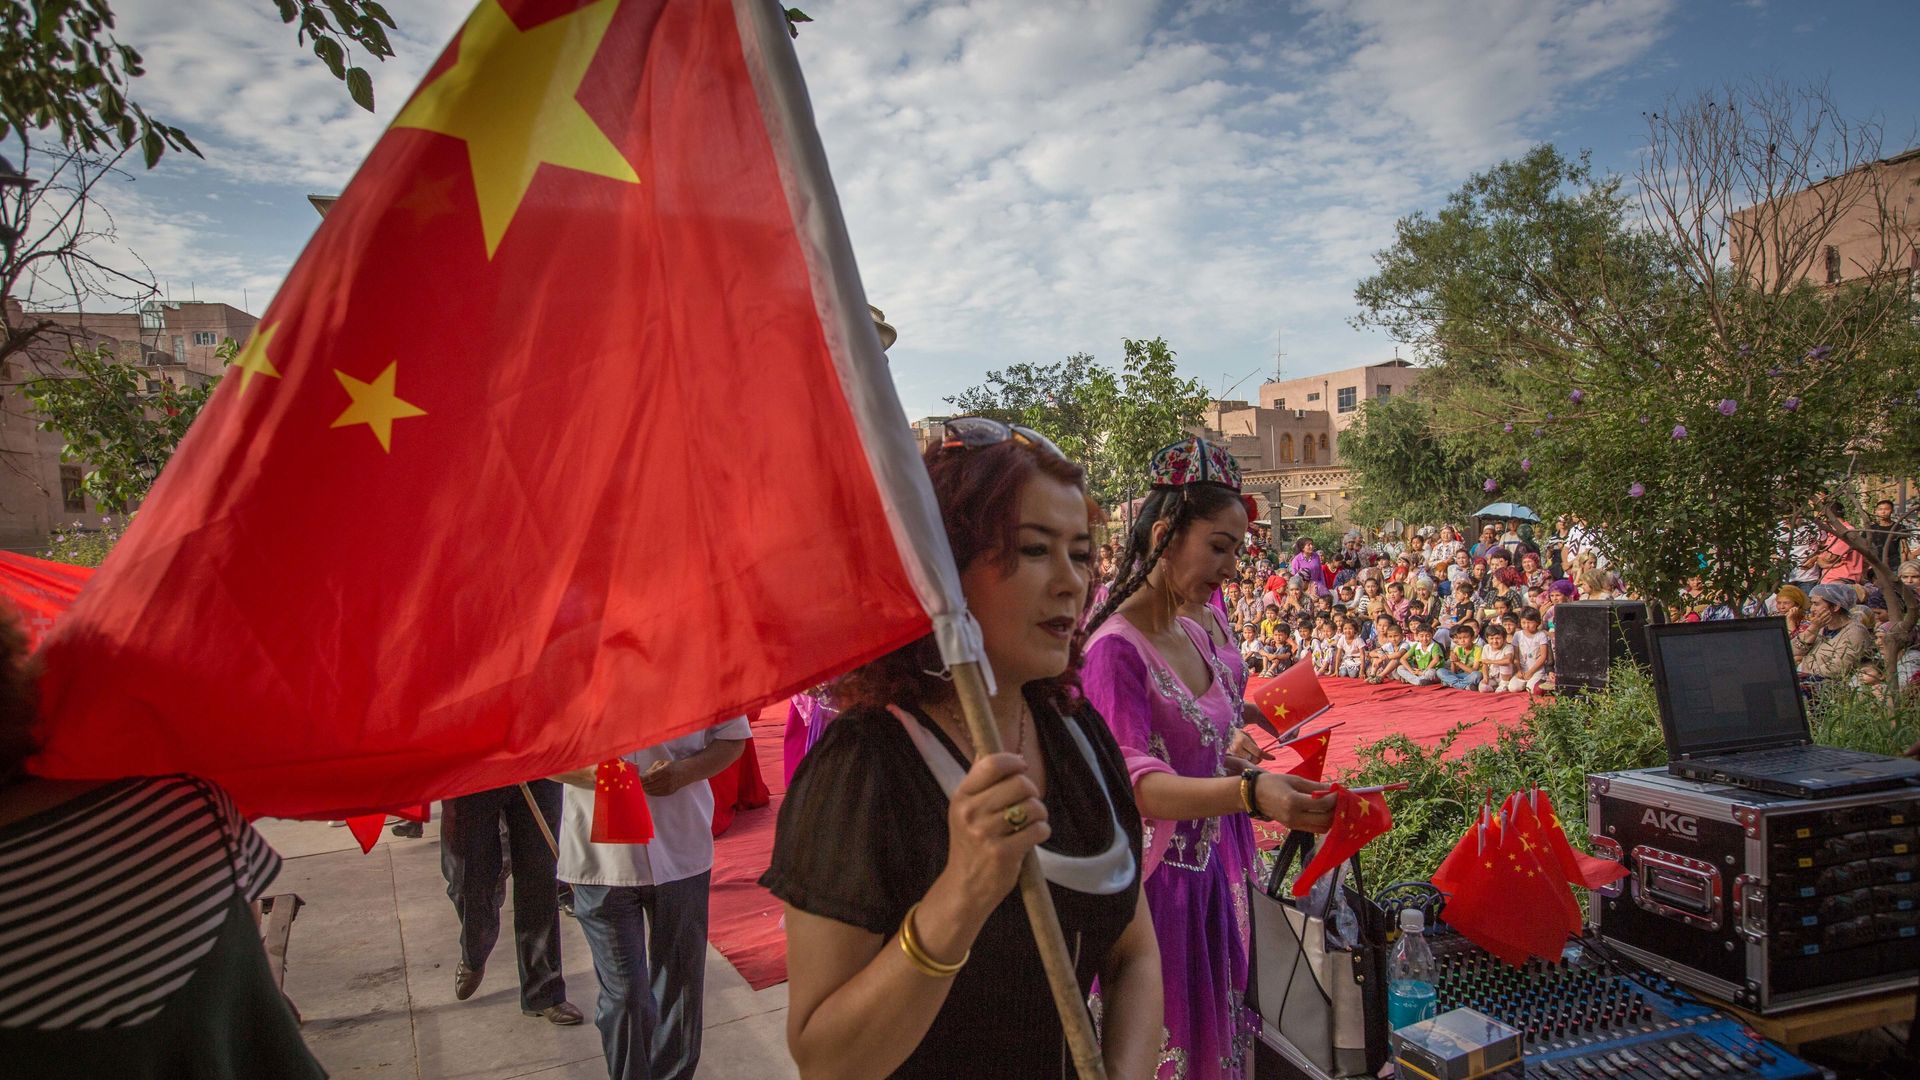 In this image, a Uyghur woman in a black shirt holds a Chinese flag above her as she walks down the street on a cloudy day.